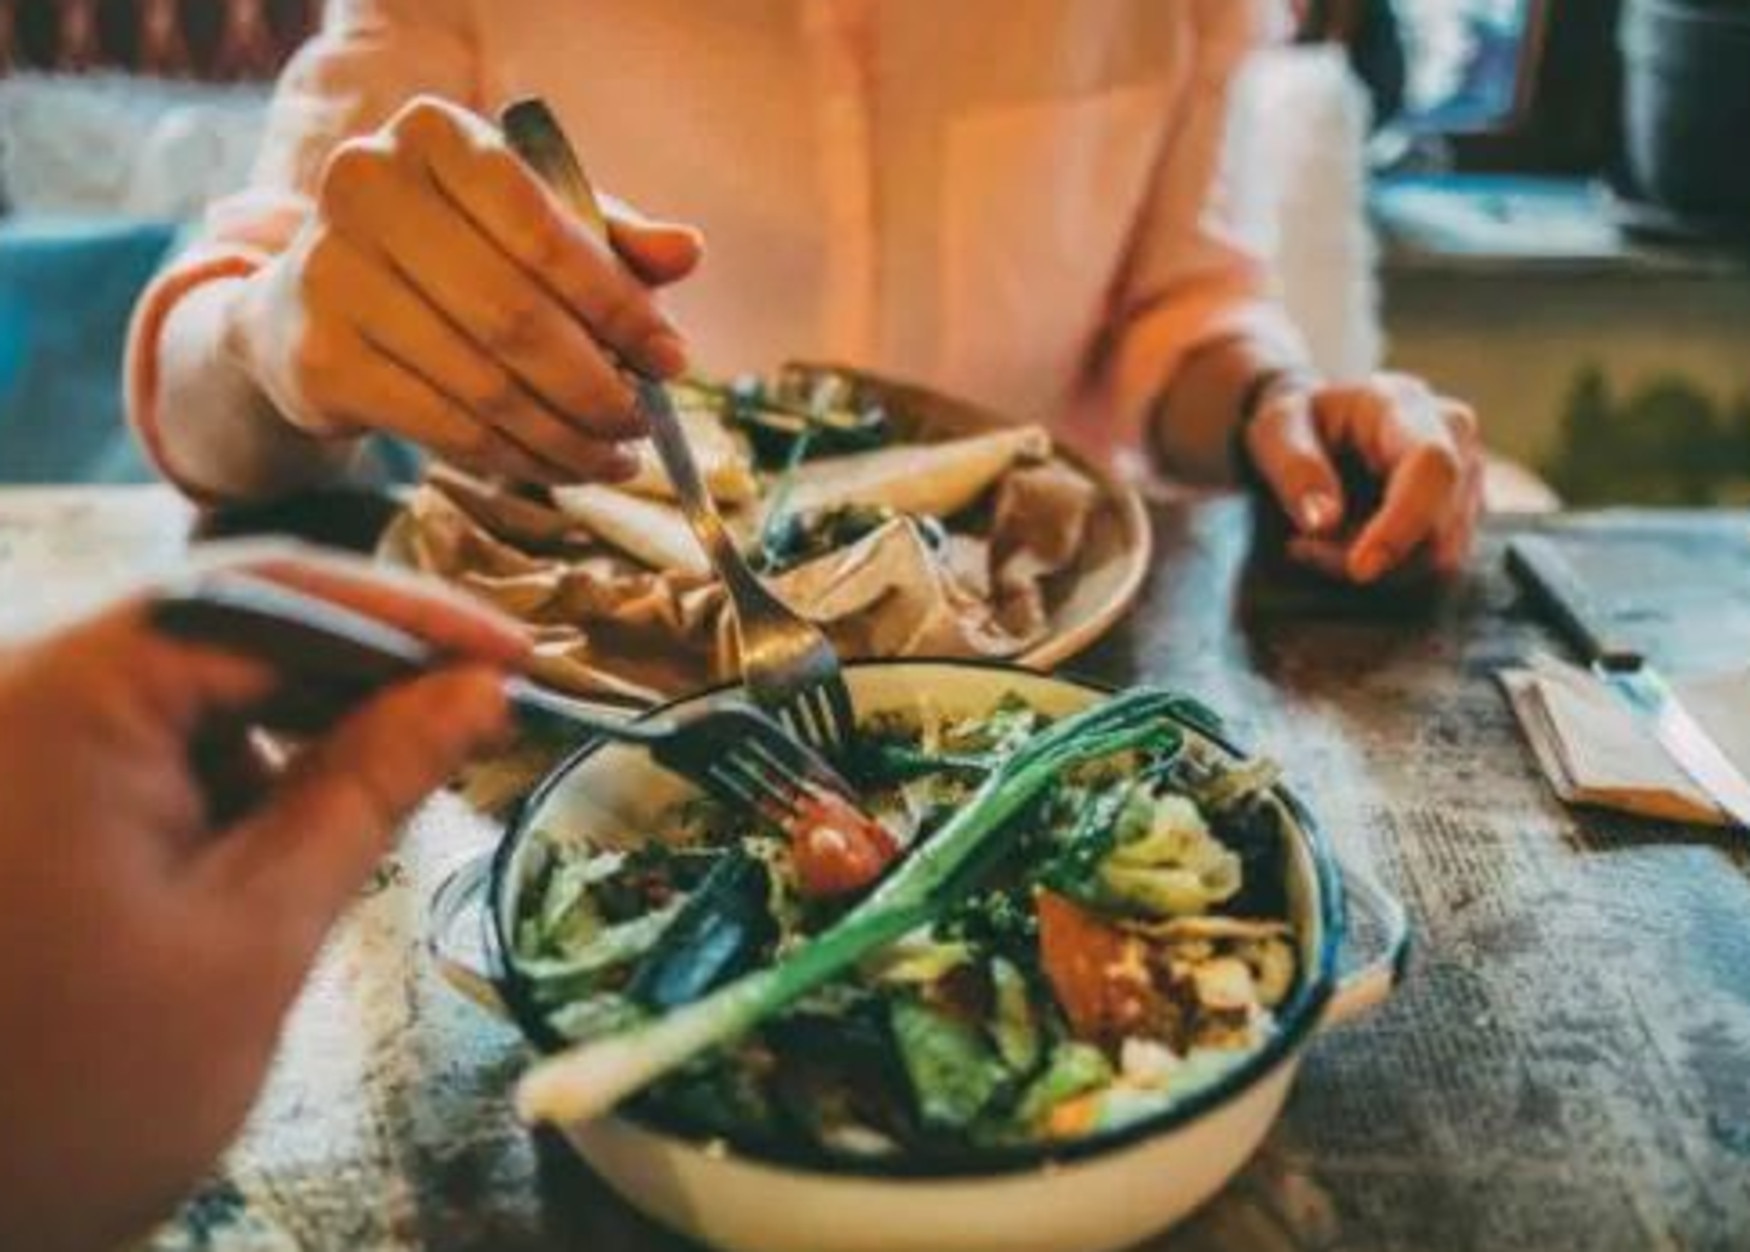 Who pays for dinner on a date became a controversial topic among her friends. Picture: Unsplash